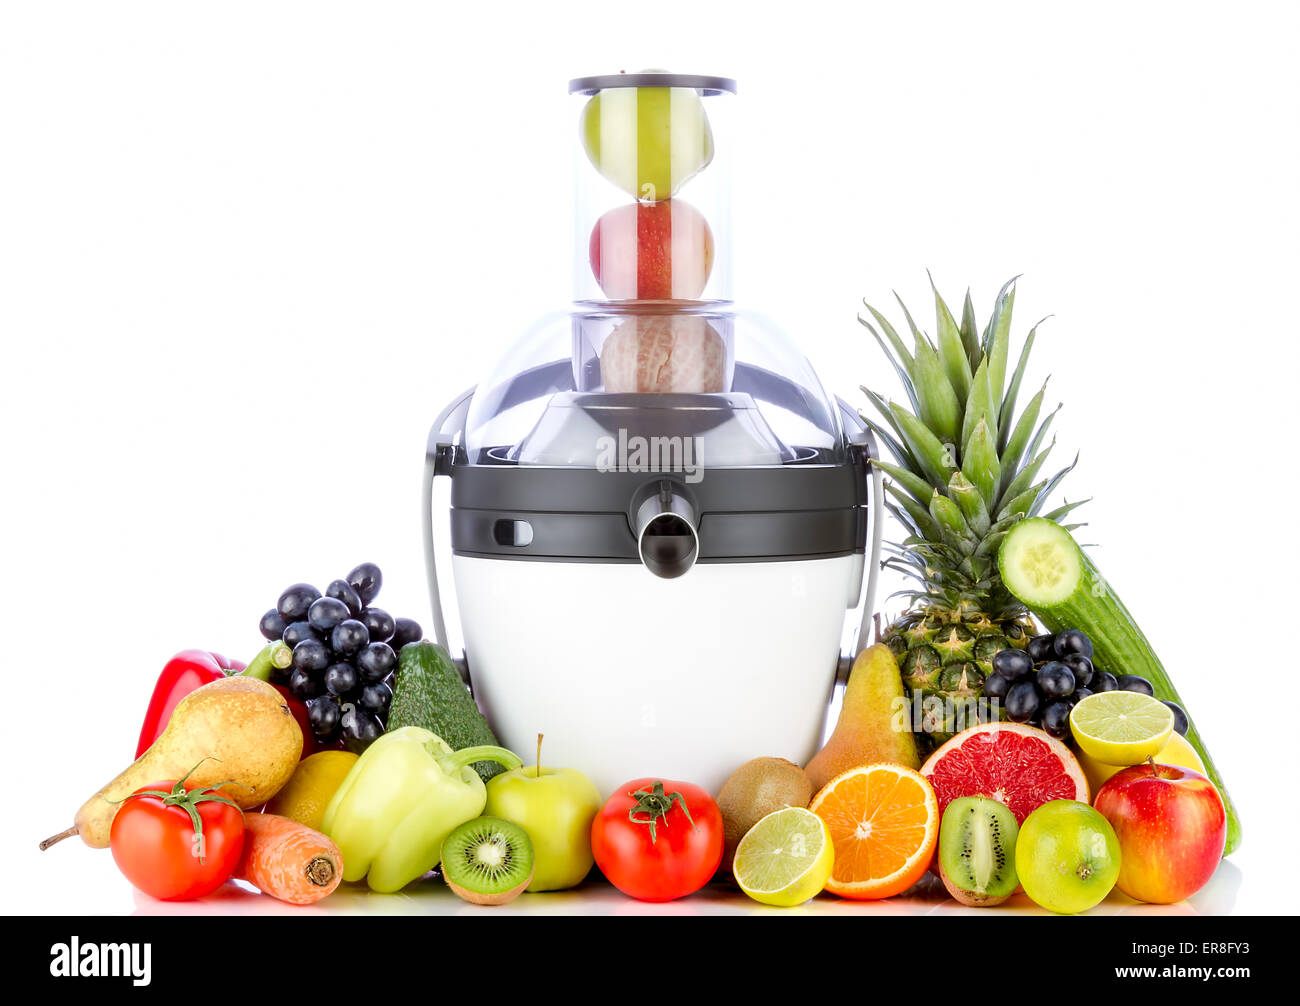 Fruits and vegetables for juice near juicer on white background. Healthy fruits eating and drinking. Stock Photo